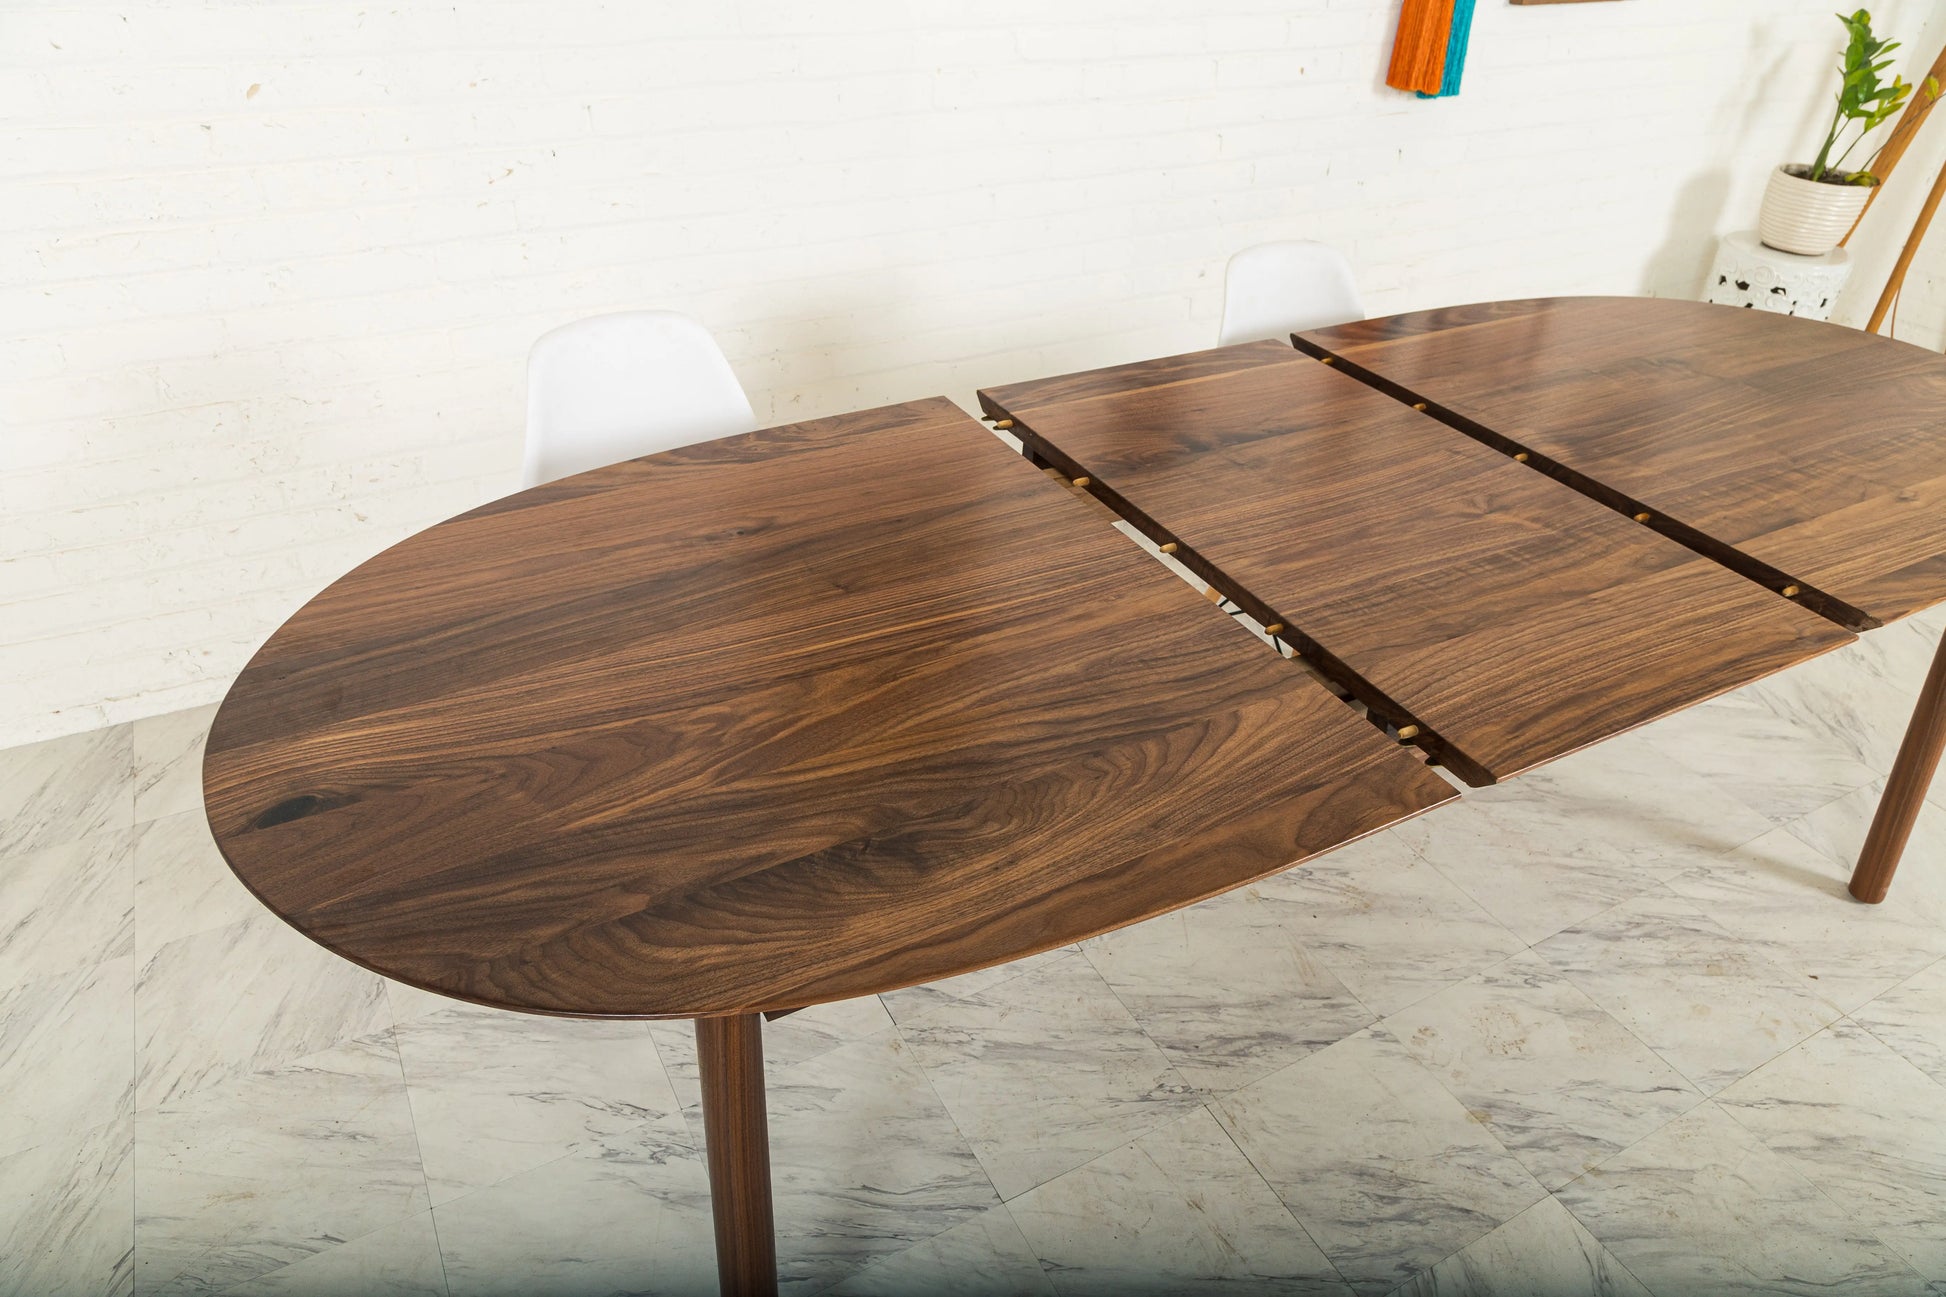 Payne table showcasing its extendable leaf feature